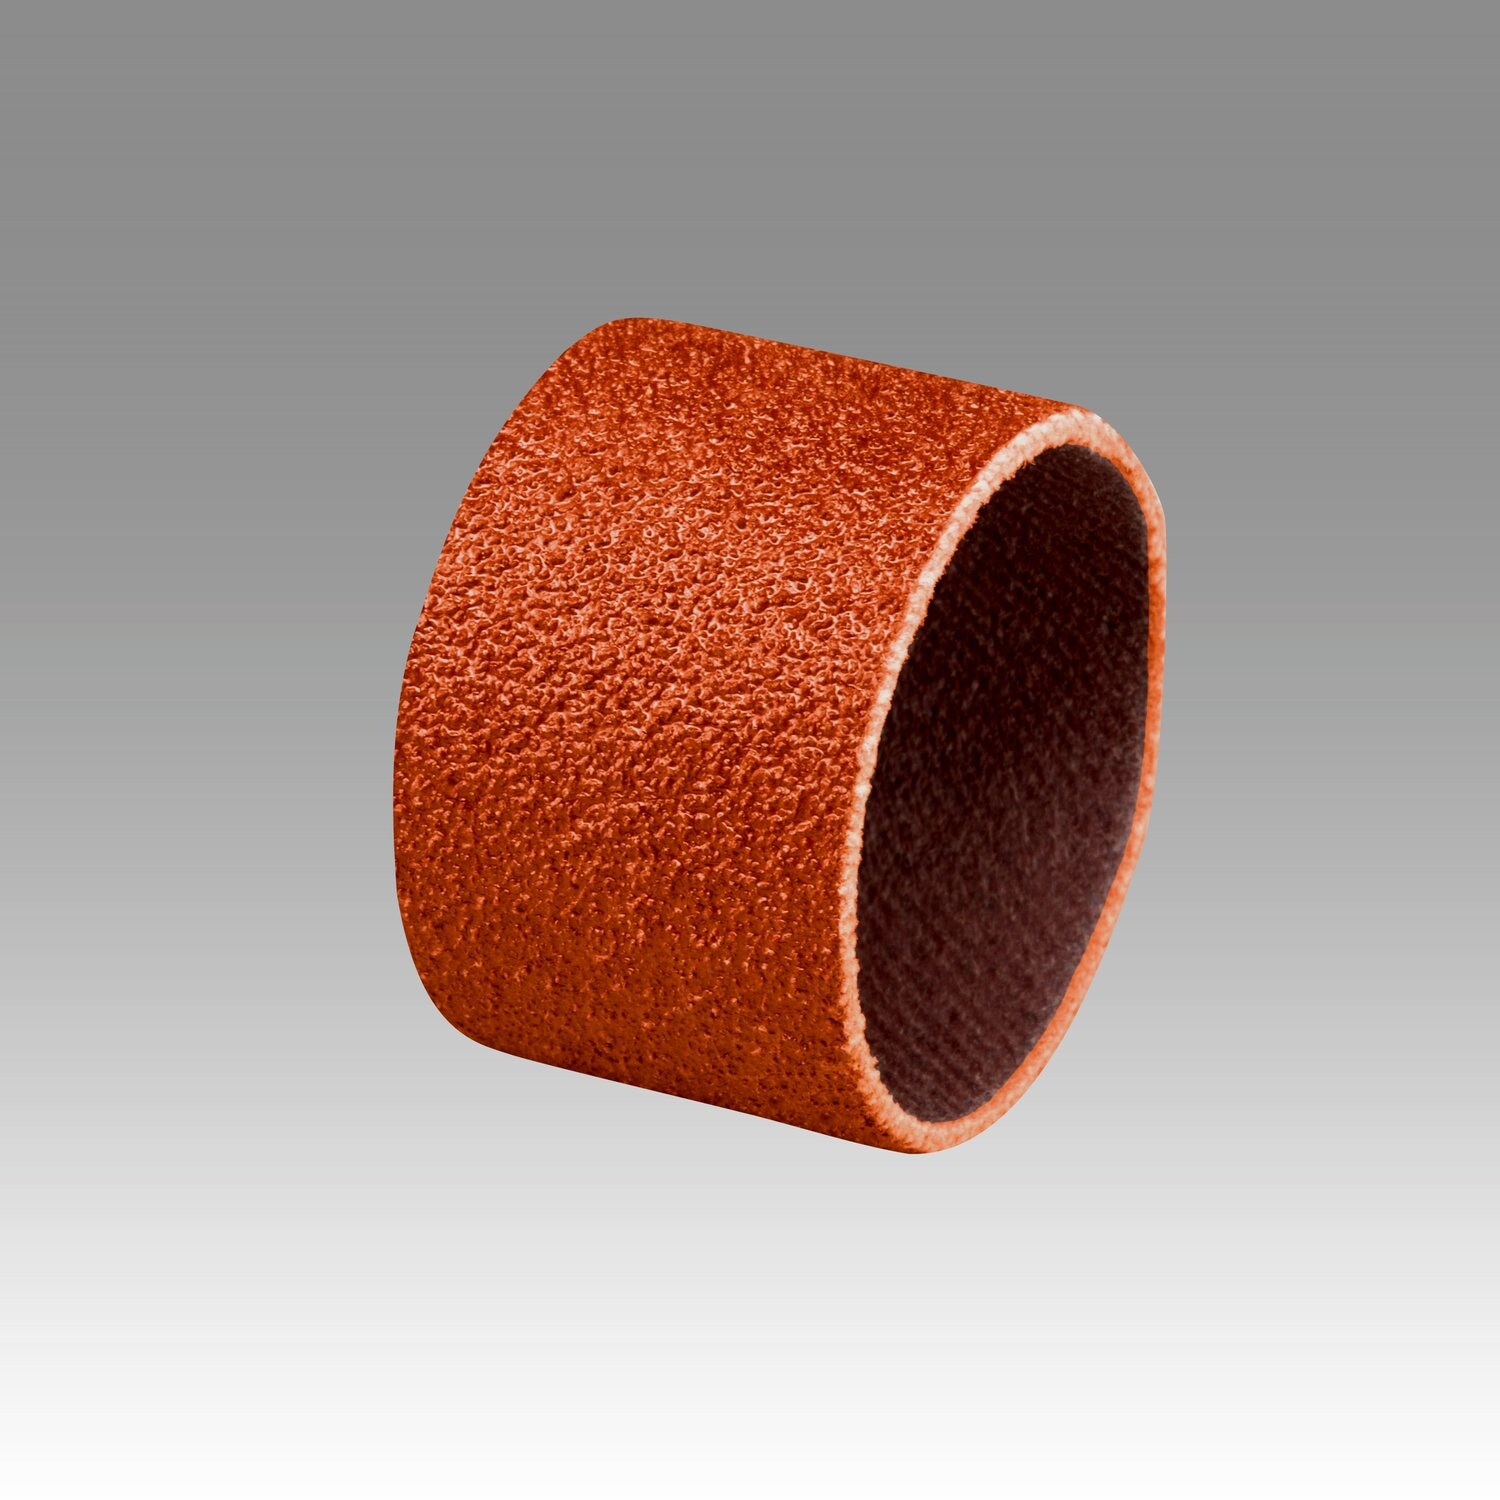 7010508261 - 3M Cloth Band 747D, P120 X-weight, 1/2 in x 1/2 in